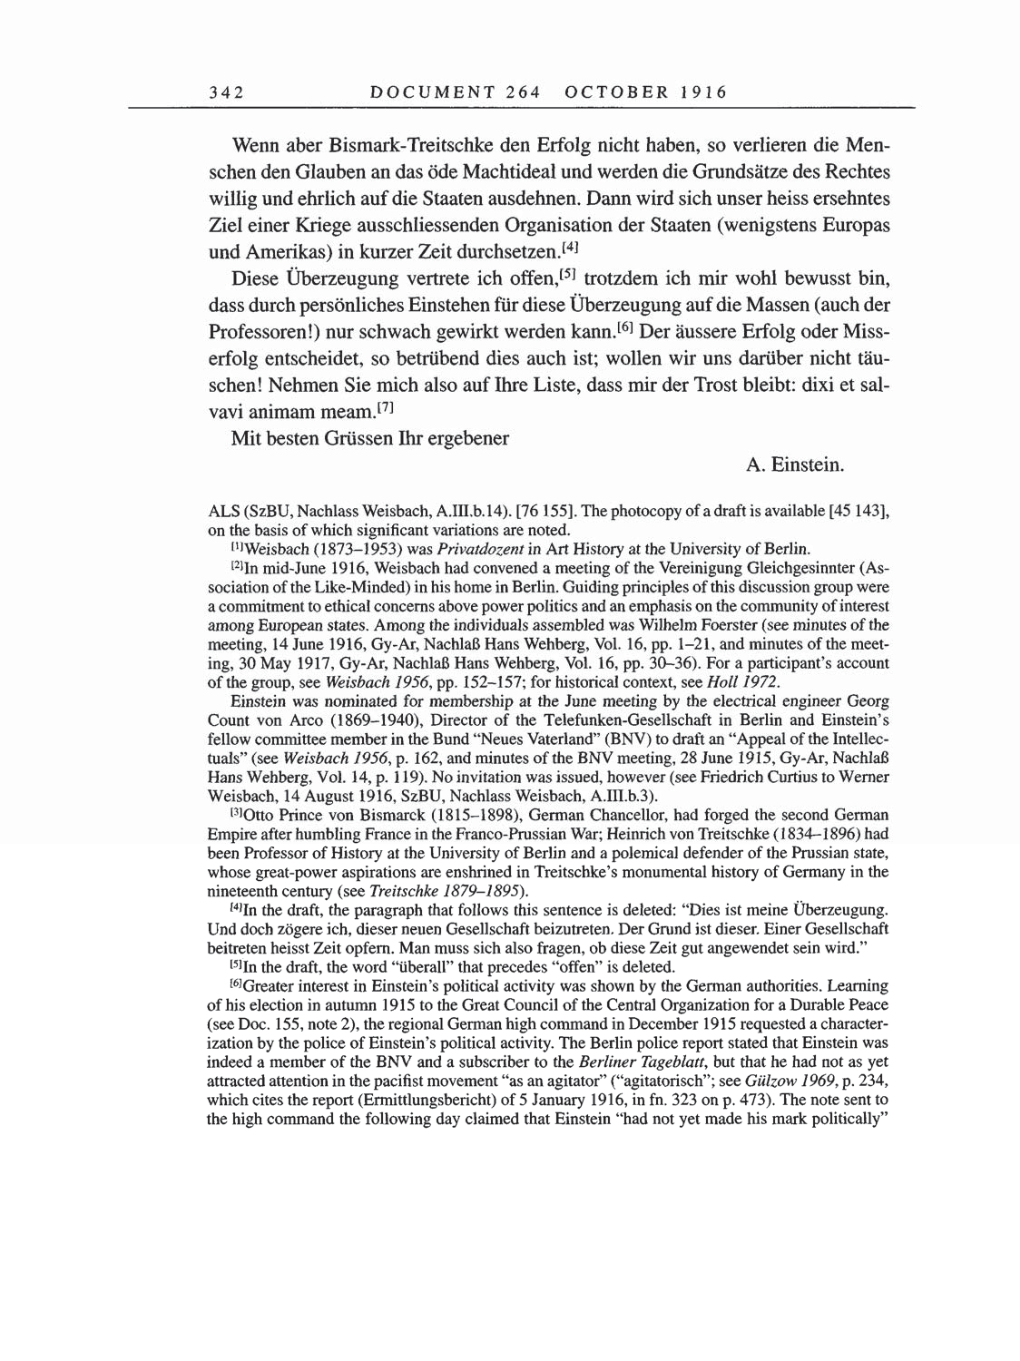 Volume 8, Part A: The Berlin Years: Correspondence 1914-1917 page 342